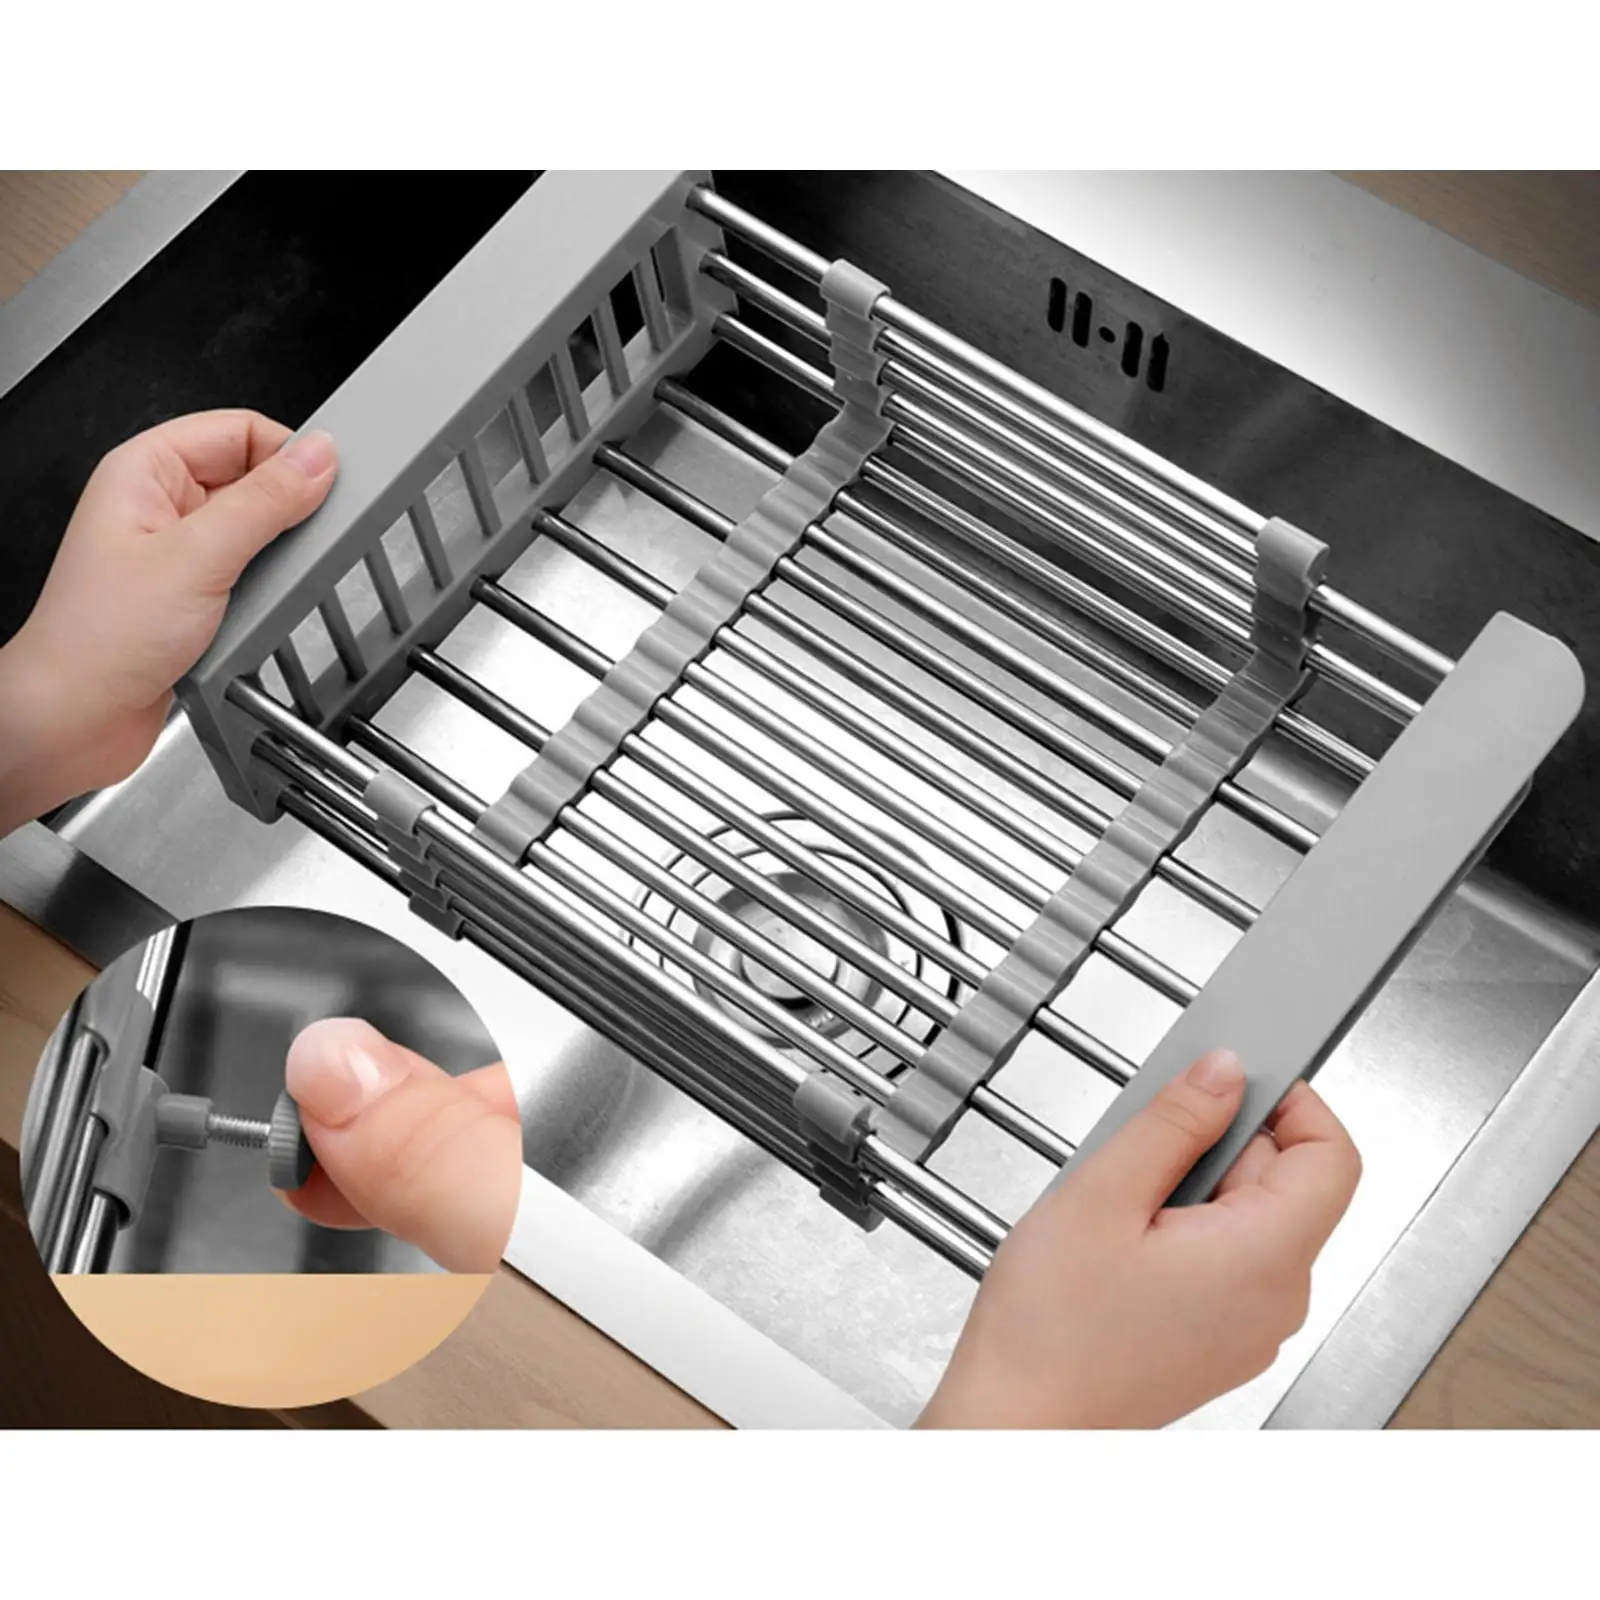 Adjustable Dish Drying Rack Multipurpose Dish Organizer Expandable Dish Drying Rack for Kitchen Sink Items Storage and Drying